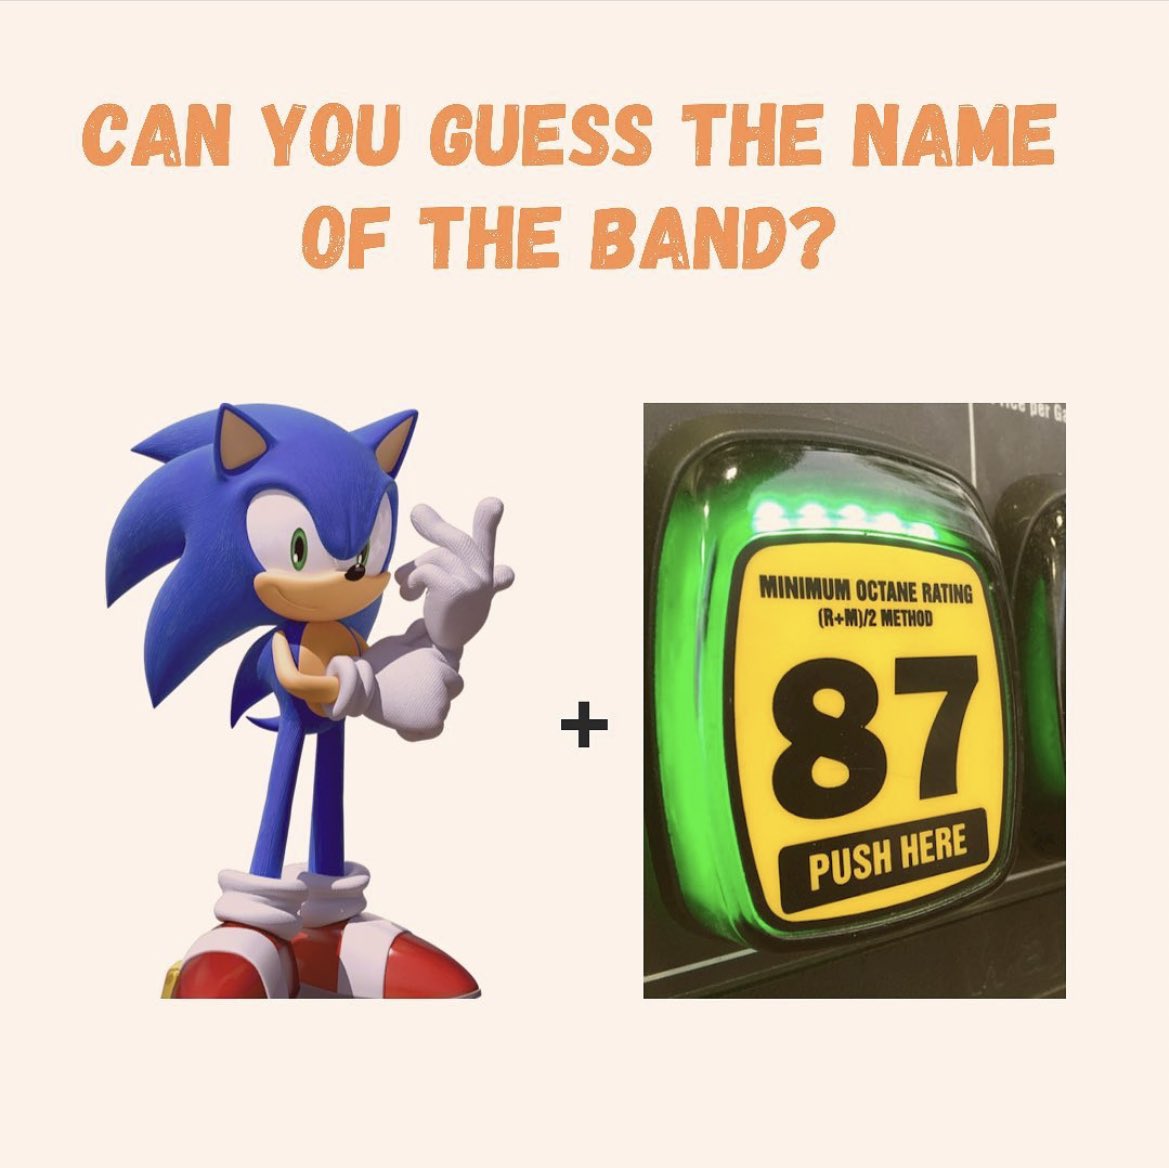 This is a band who made the soundtrack to our show Little Cupid... Can you guess the name in the comments? GO!

#roku #rokutv #tv #film #movie #show #urbankidzworld #family #kids #game #guessing #band #music #sonic #hedgehog https://t.co/VgUgtqsAoI